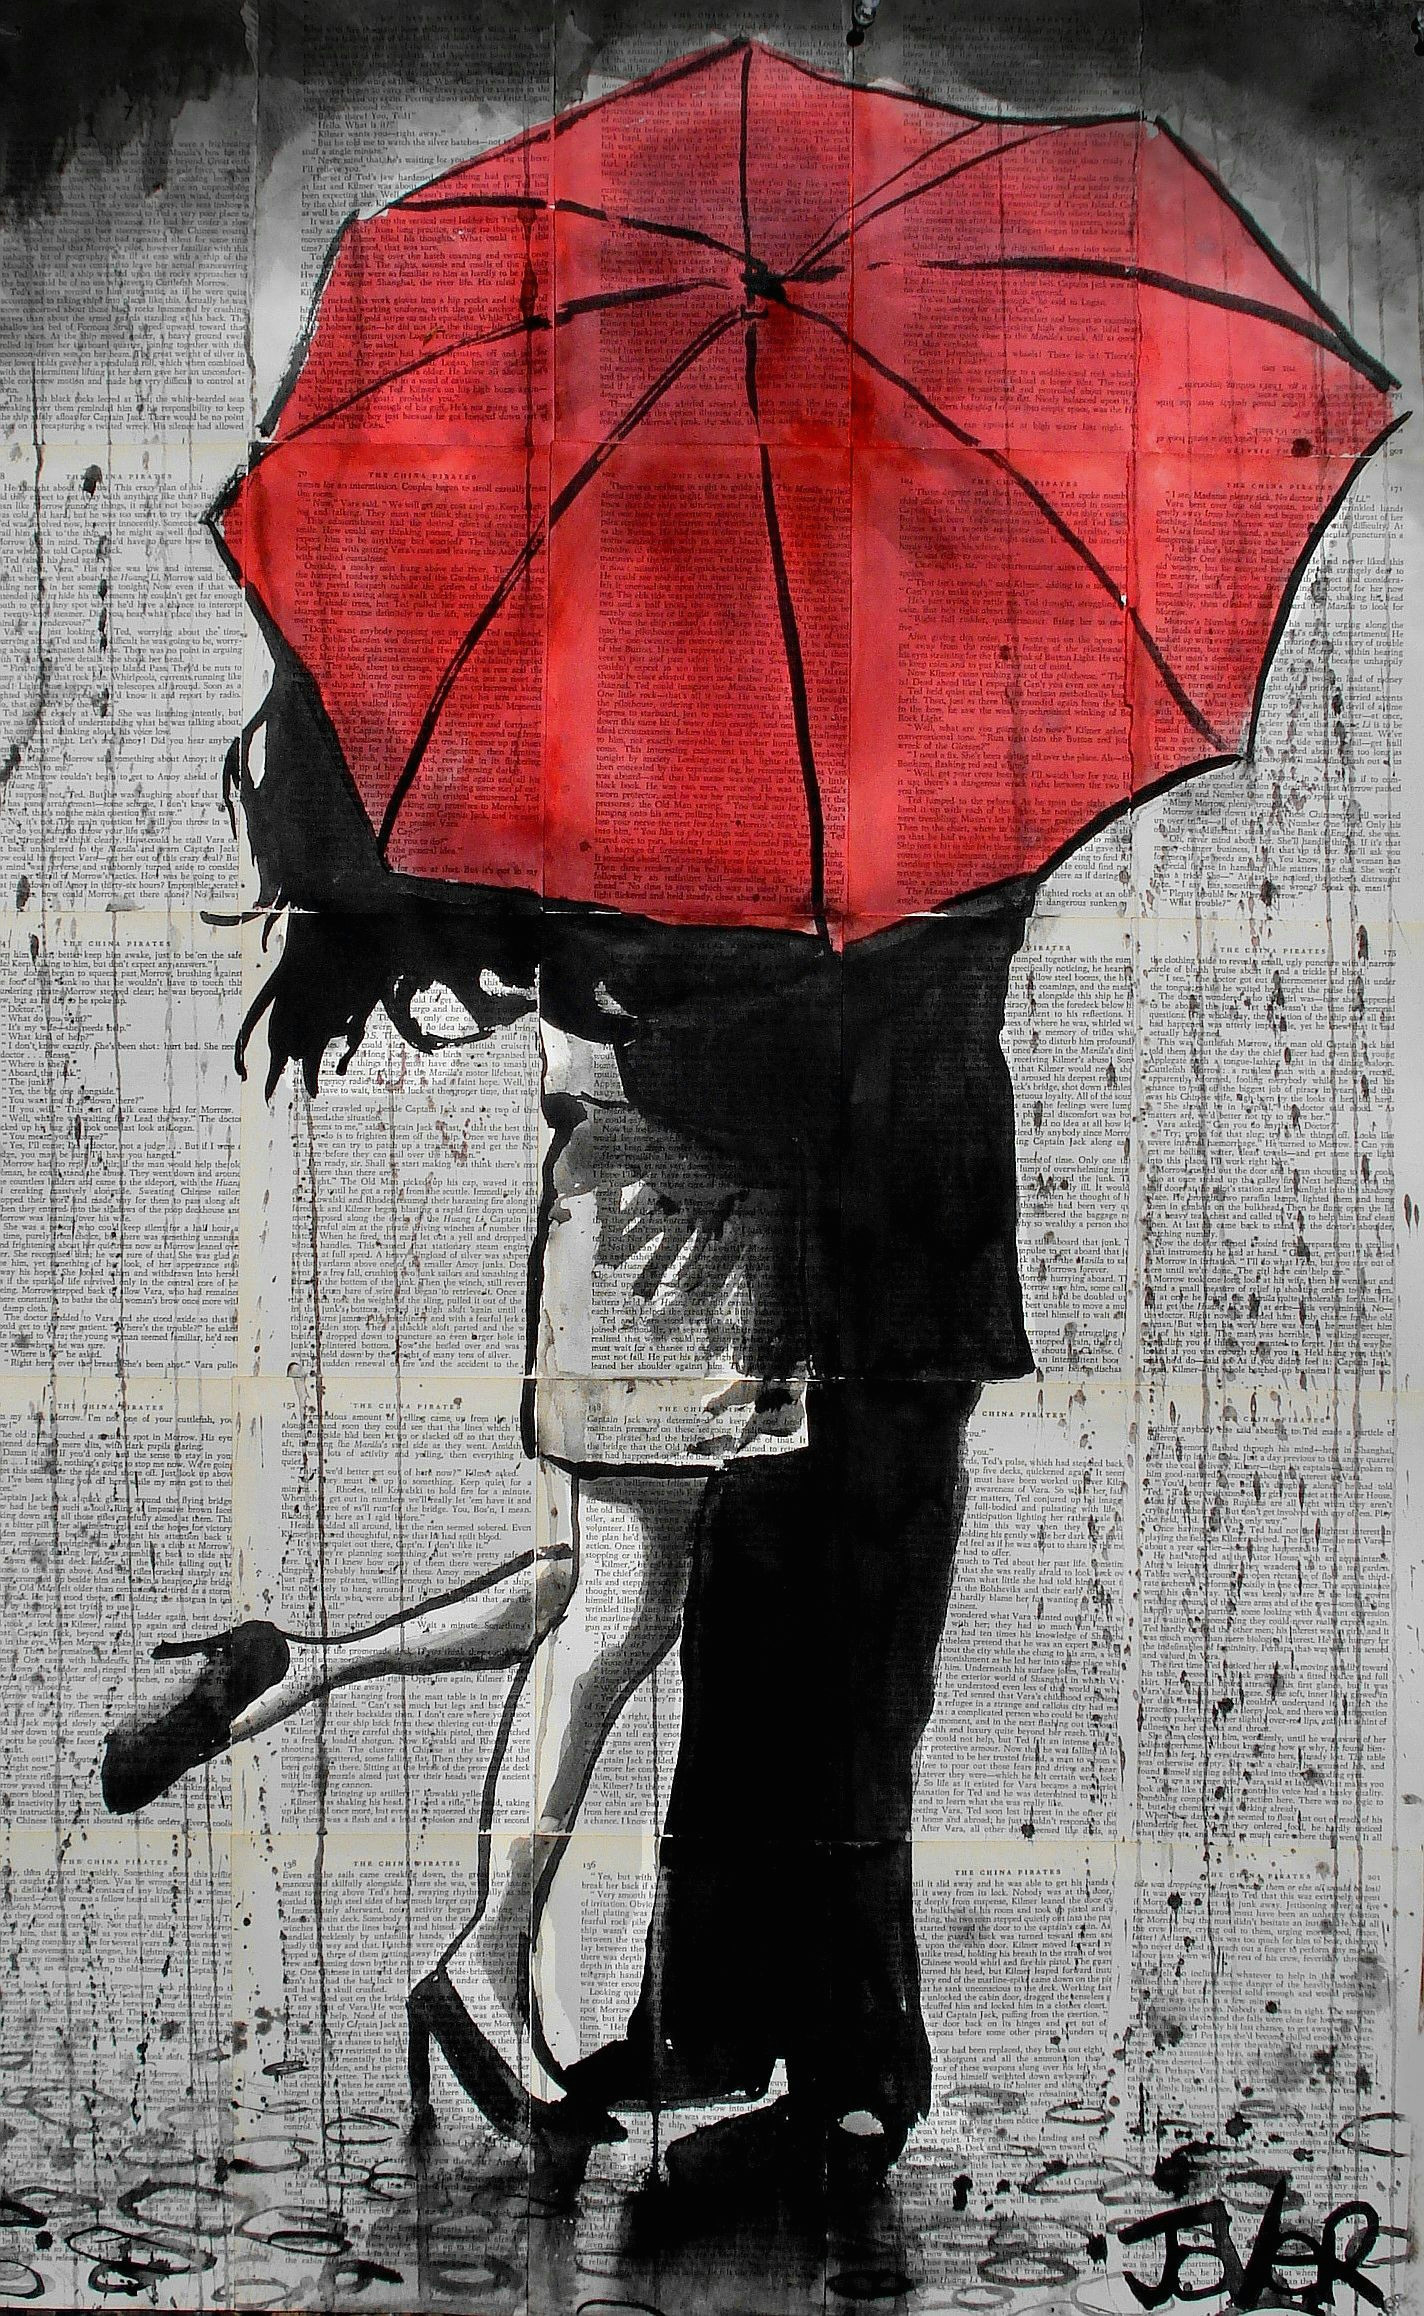 Drawing Ideas Umbrella Red Umbrella3 Paintings In 2018 Pinterest Art Drawings and